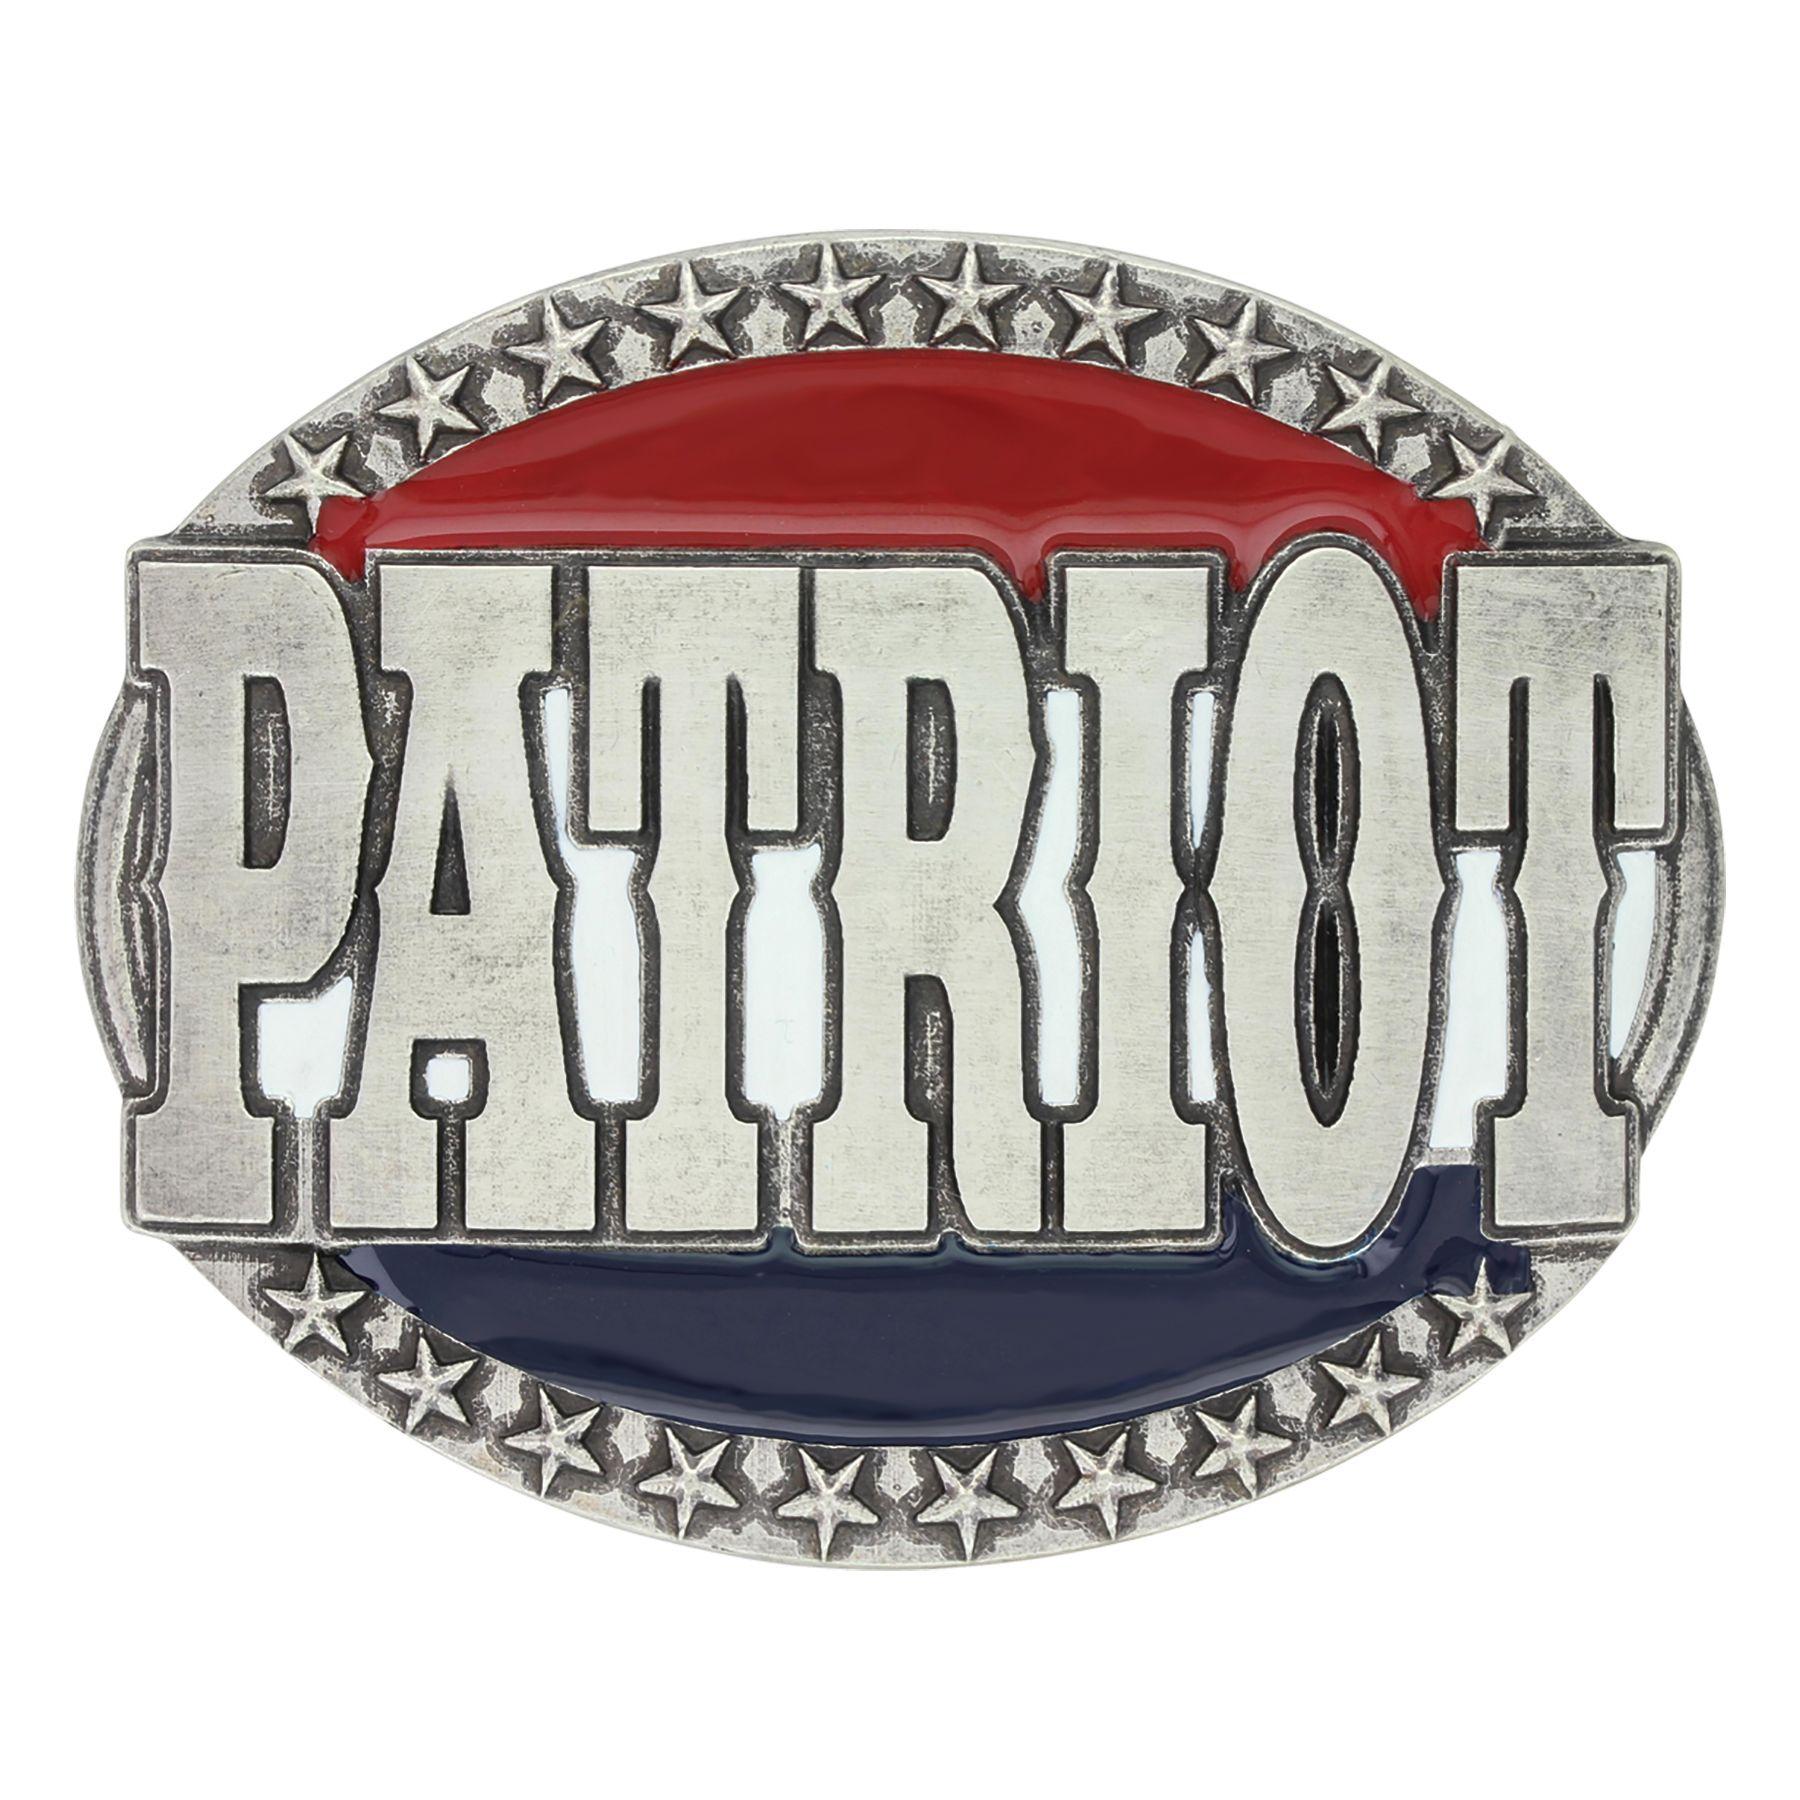 Red White and Blue Patriot Logo - Red, White & Blue Patriot Attitude Buckle